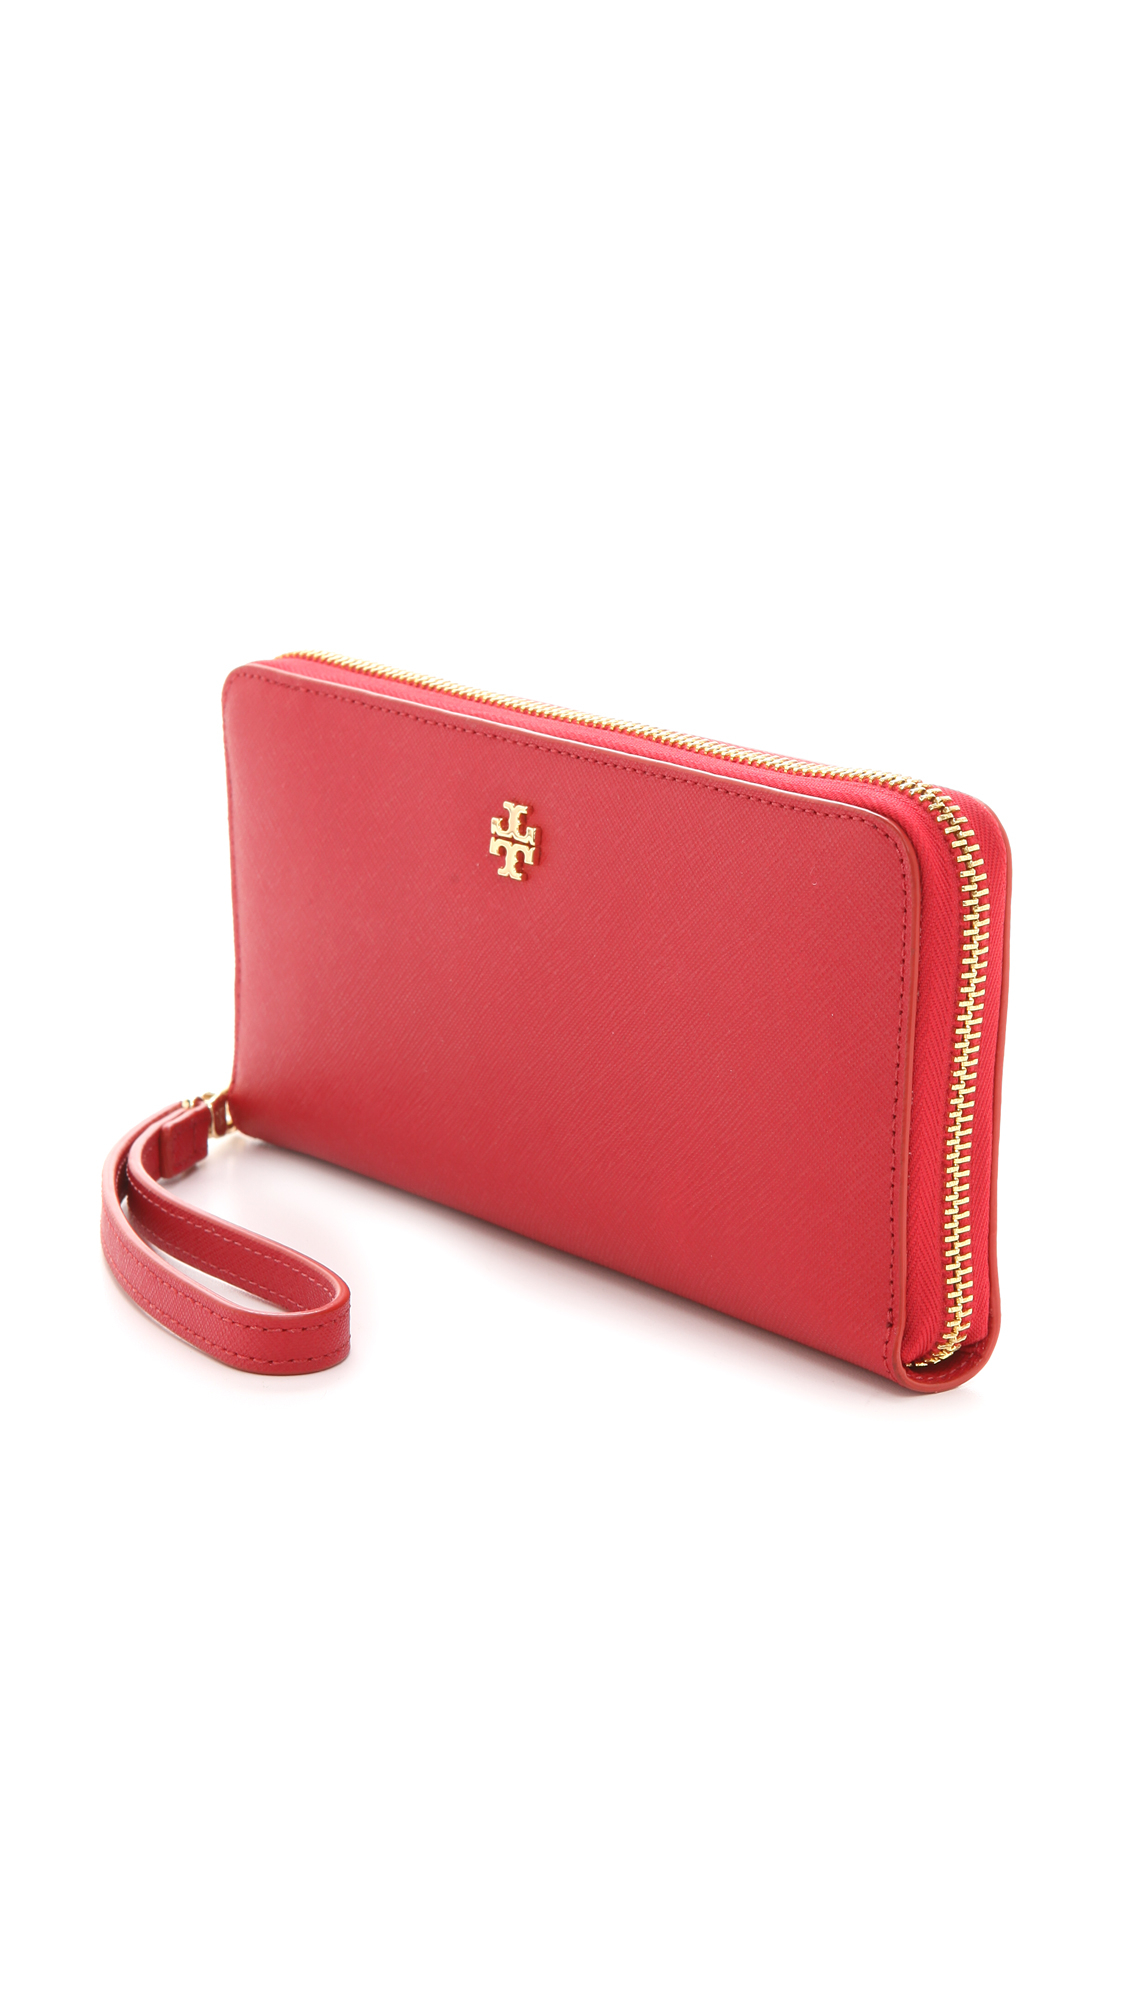 Lyst - Tory Burch York Zip Continental Wallet in Red